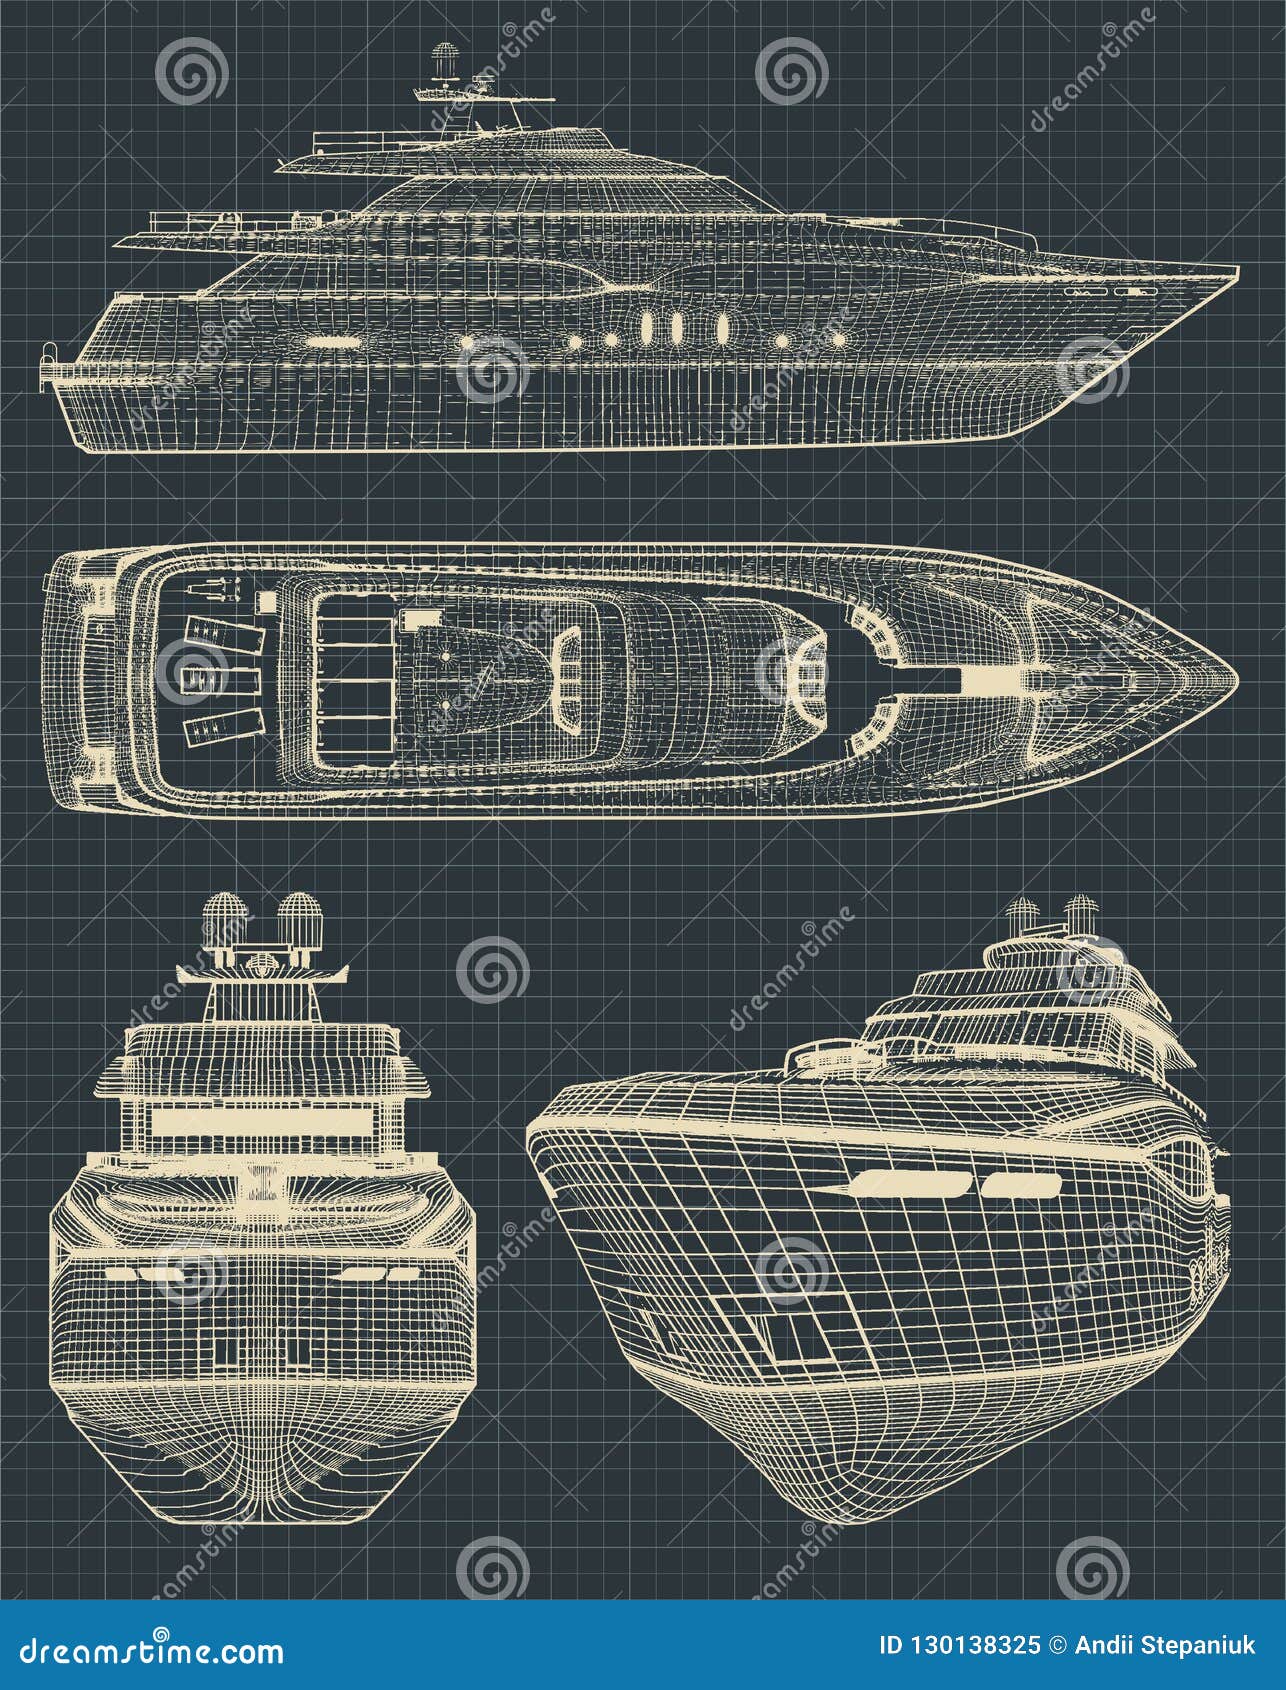 Drawings of a modern yacht stock vector. Illustration of sketch - 130138325